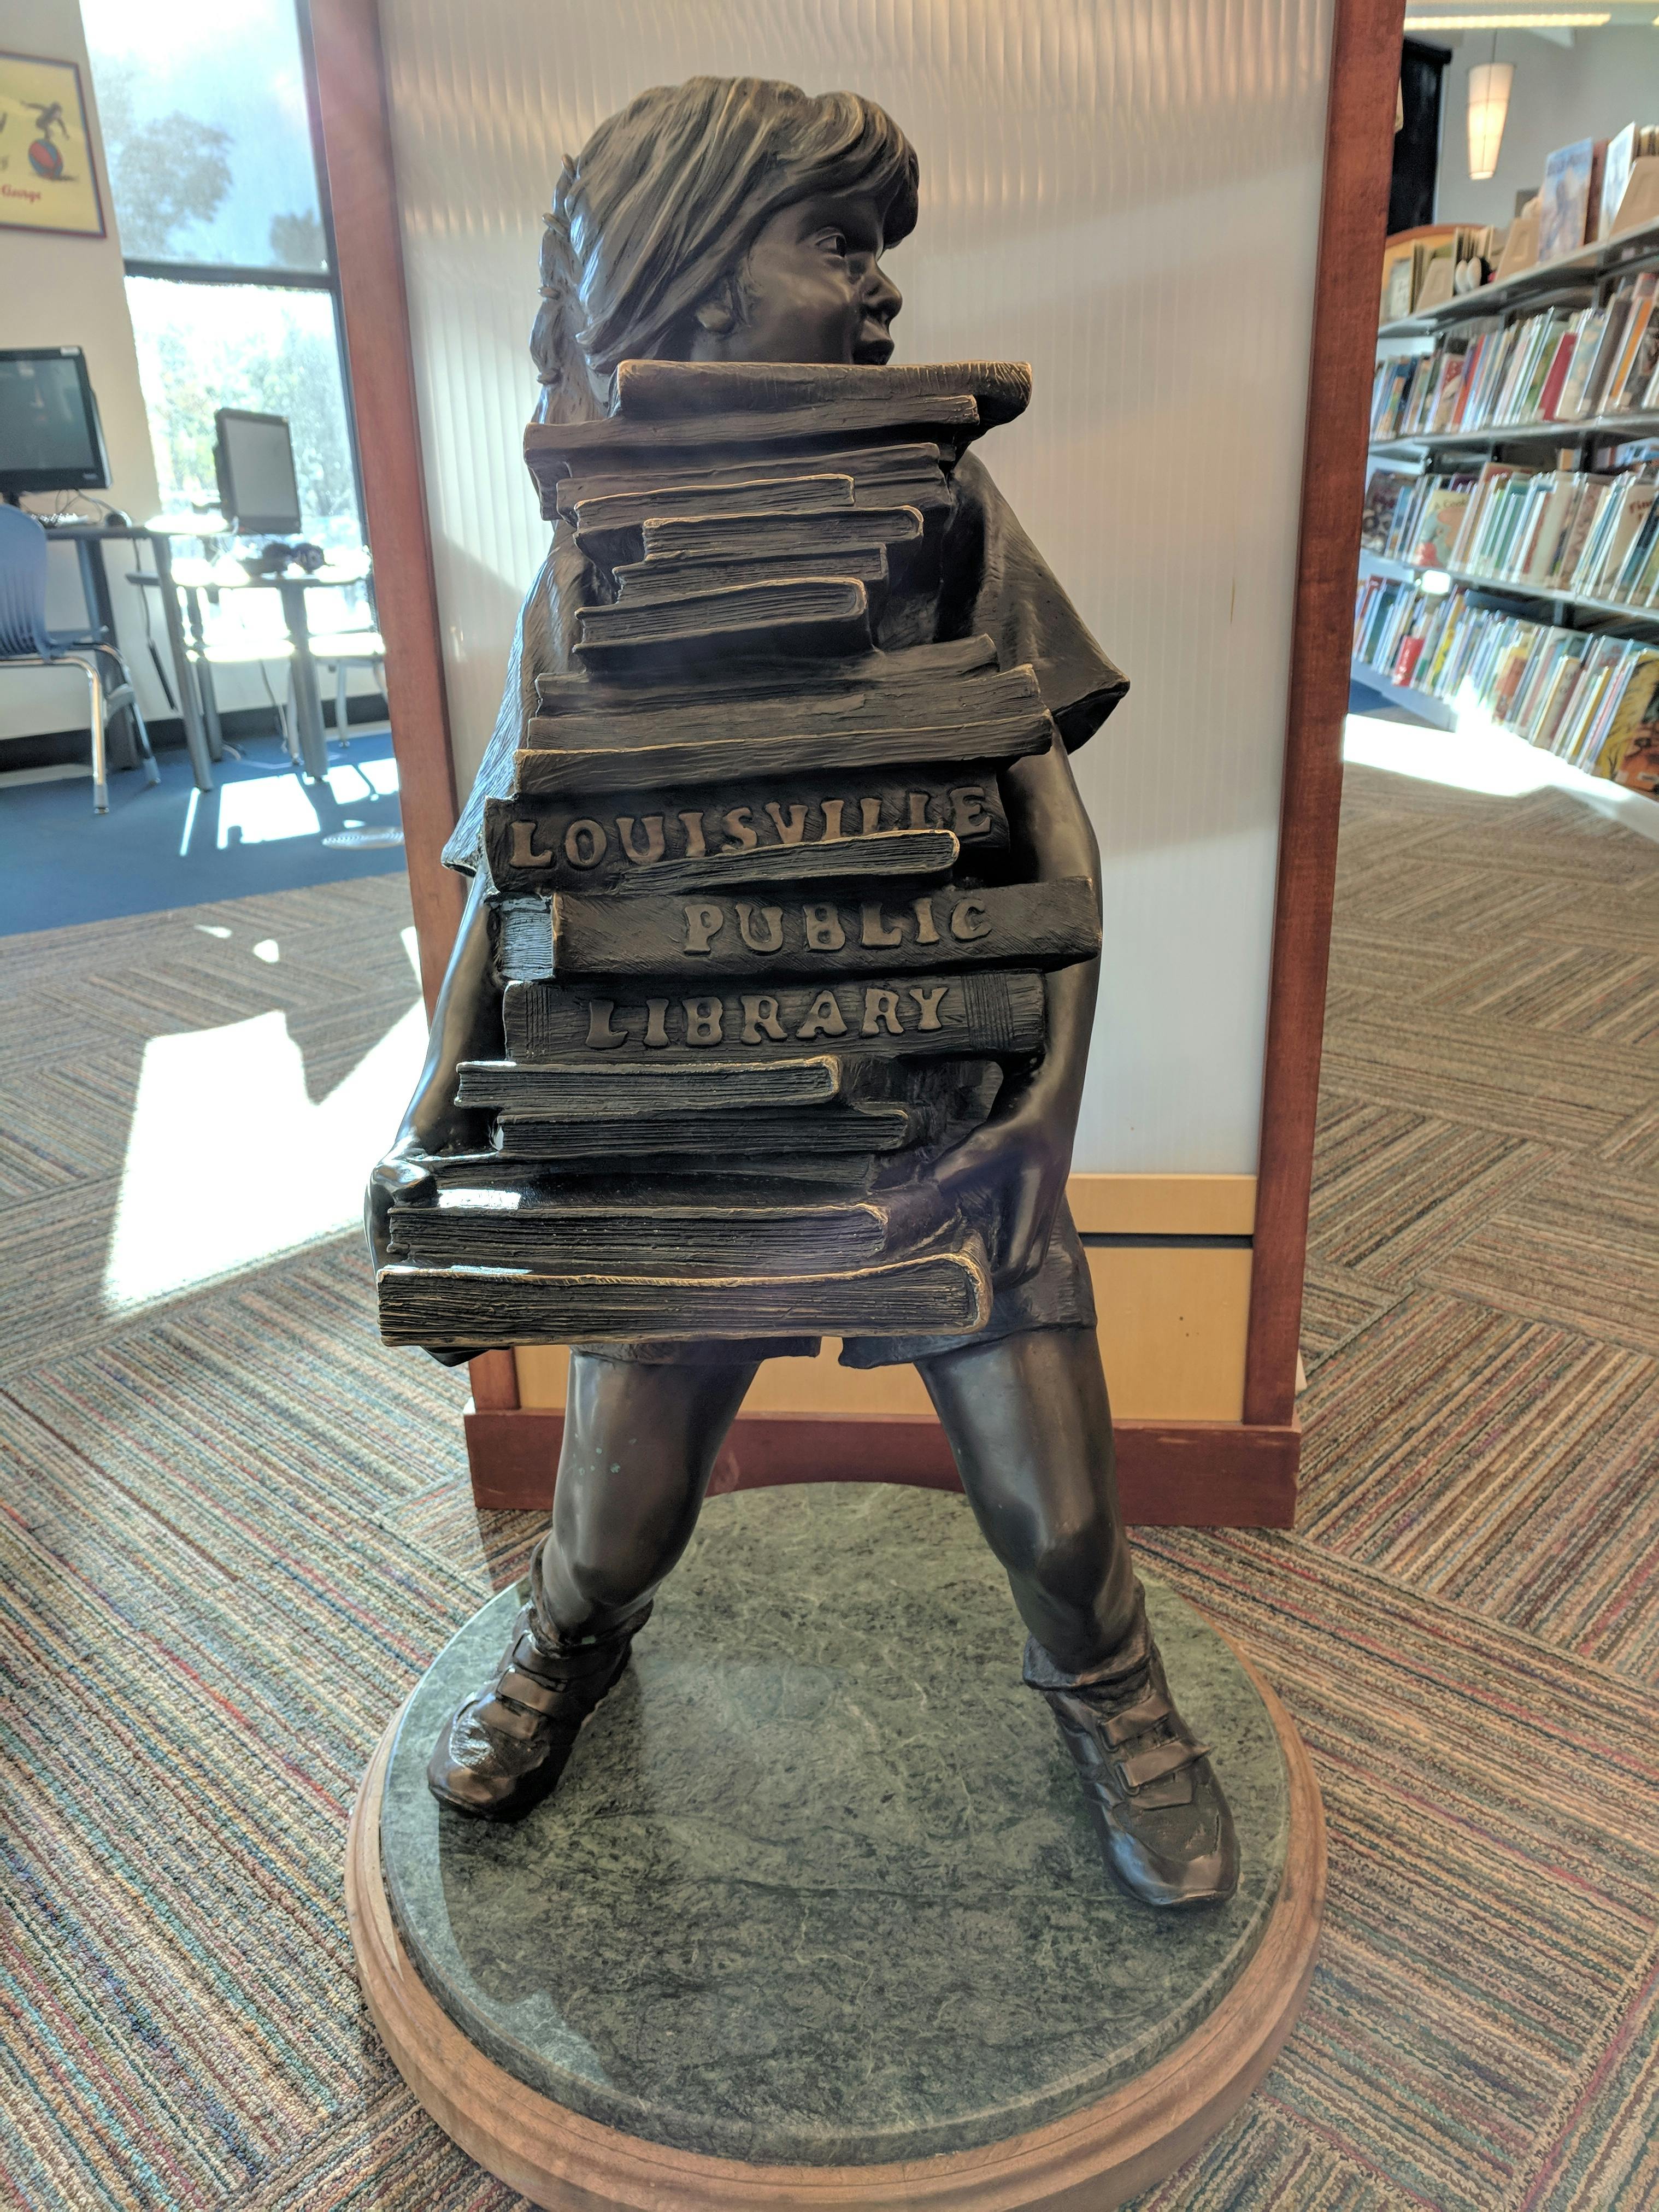 Bronze Child with Books - in Louisville library